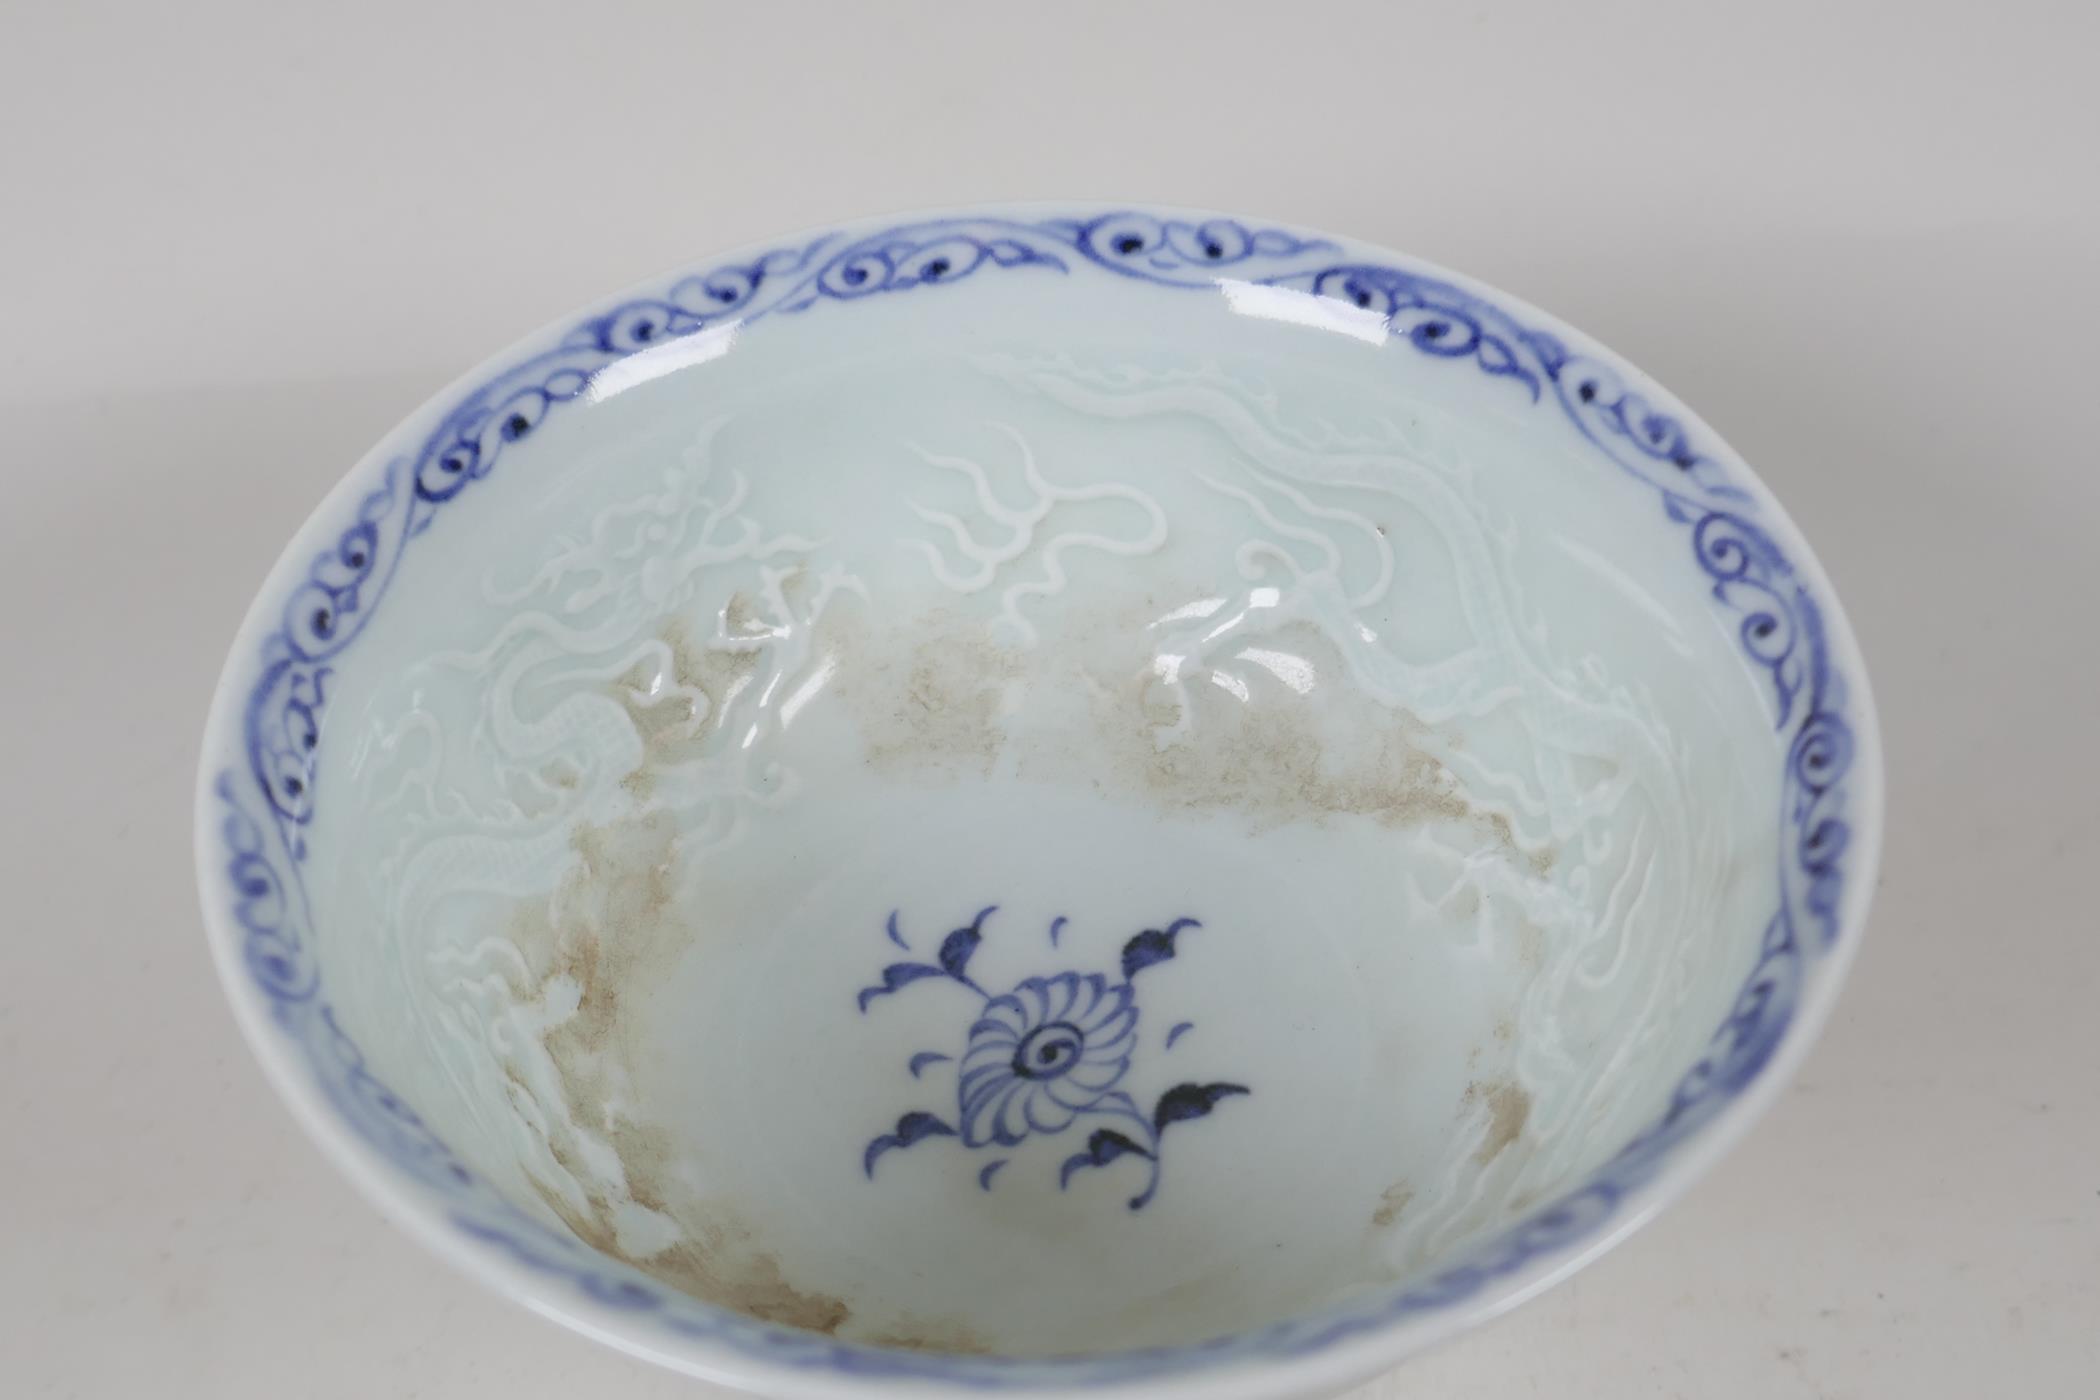 A Chinese blue & white porcelain stem cup, painted and embossed with dragons and clouds. 5" diameter - Image 5 of 5